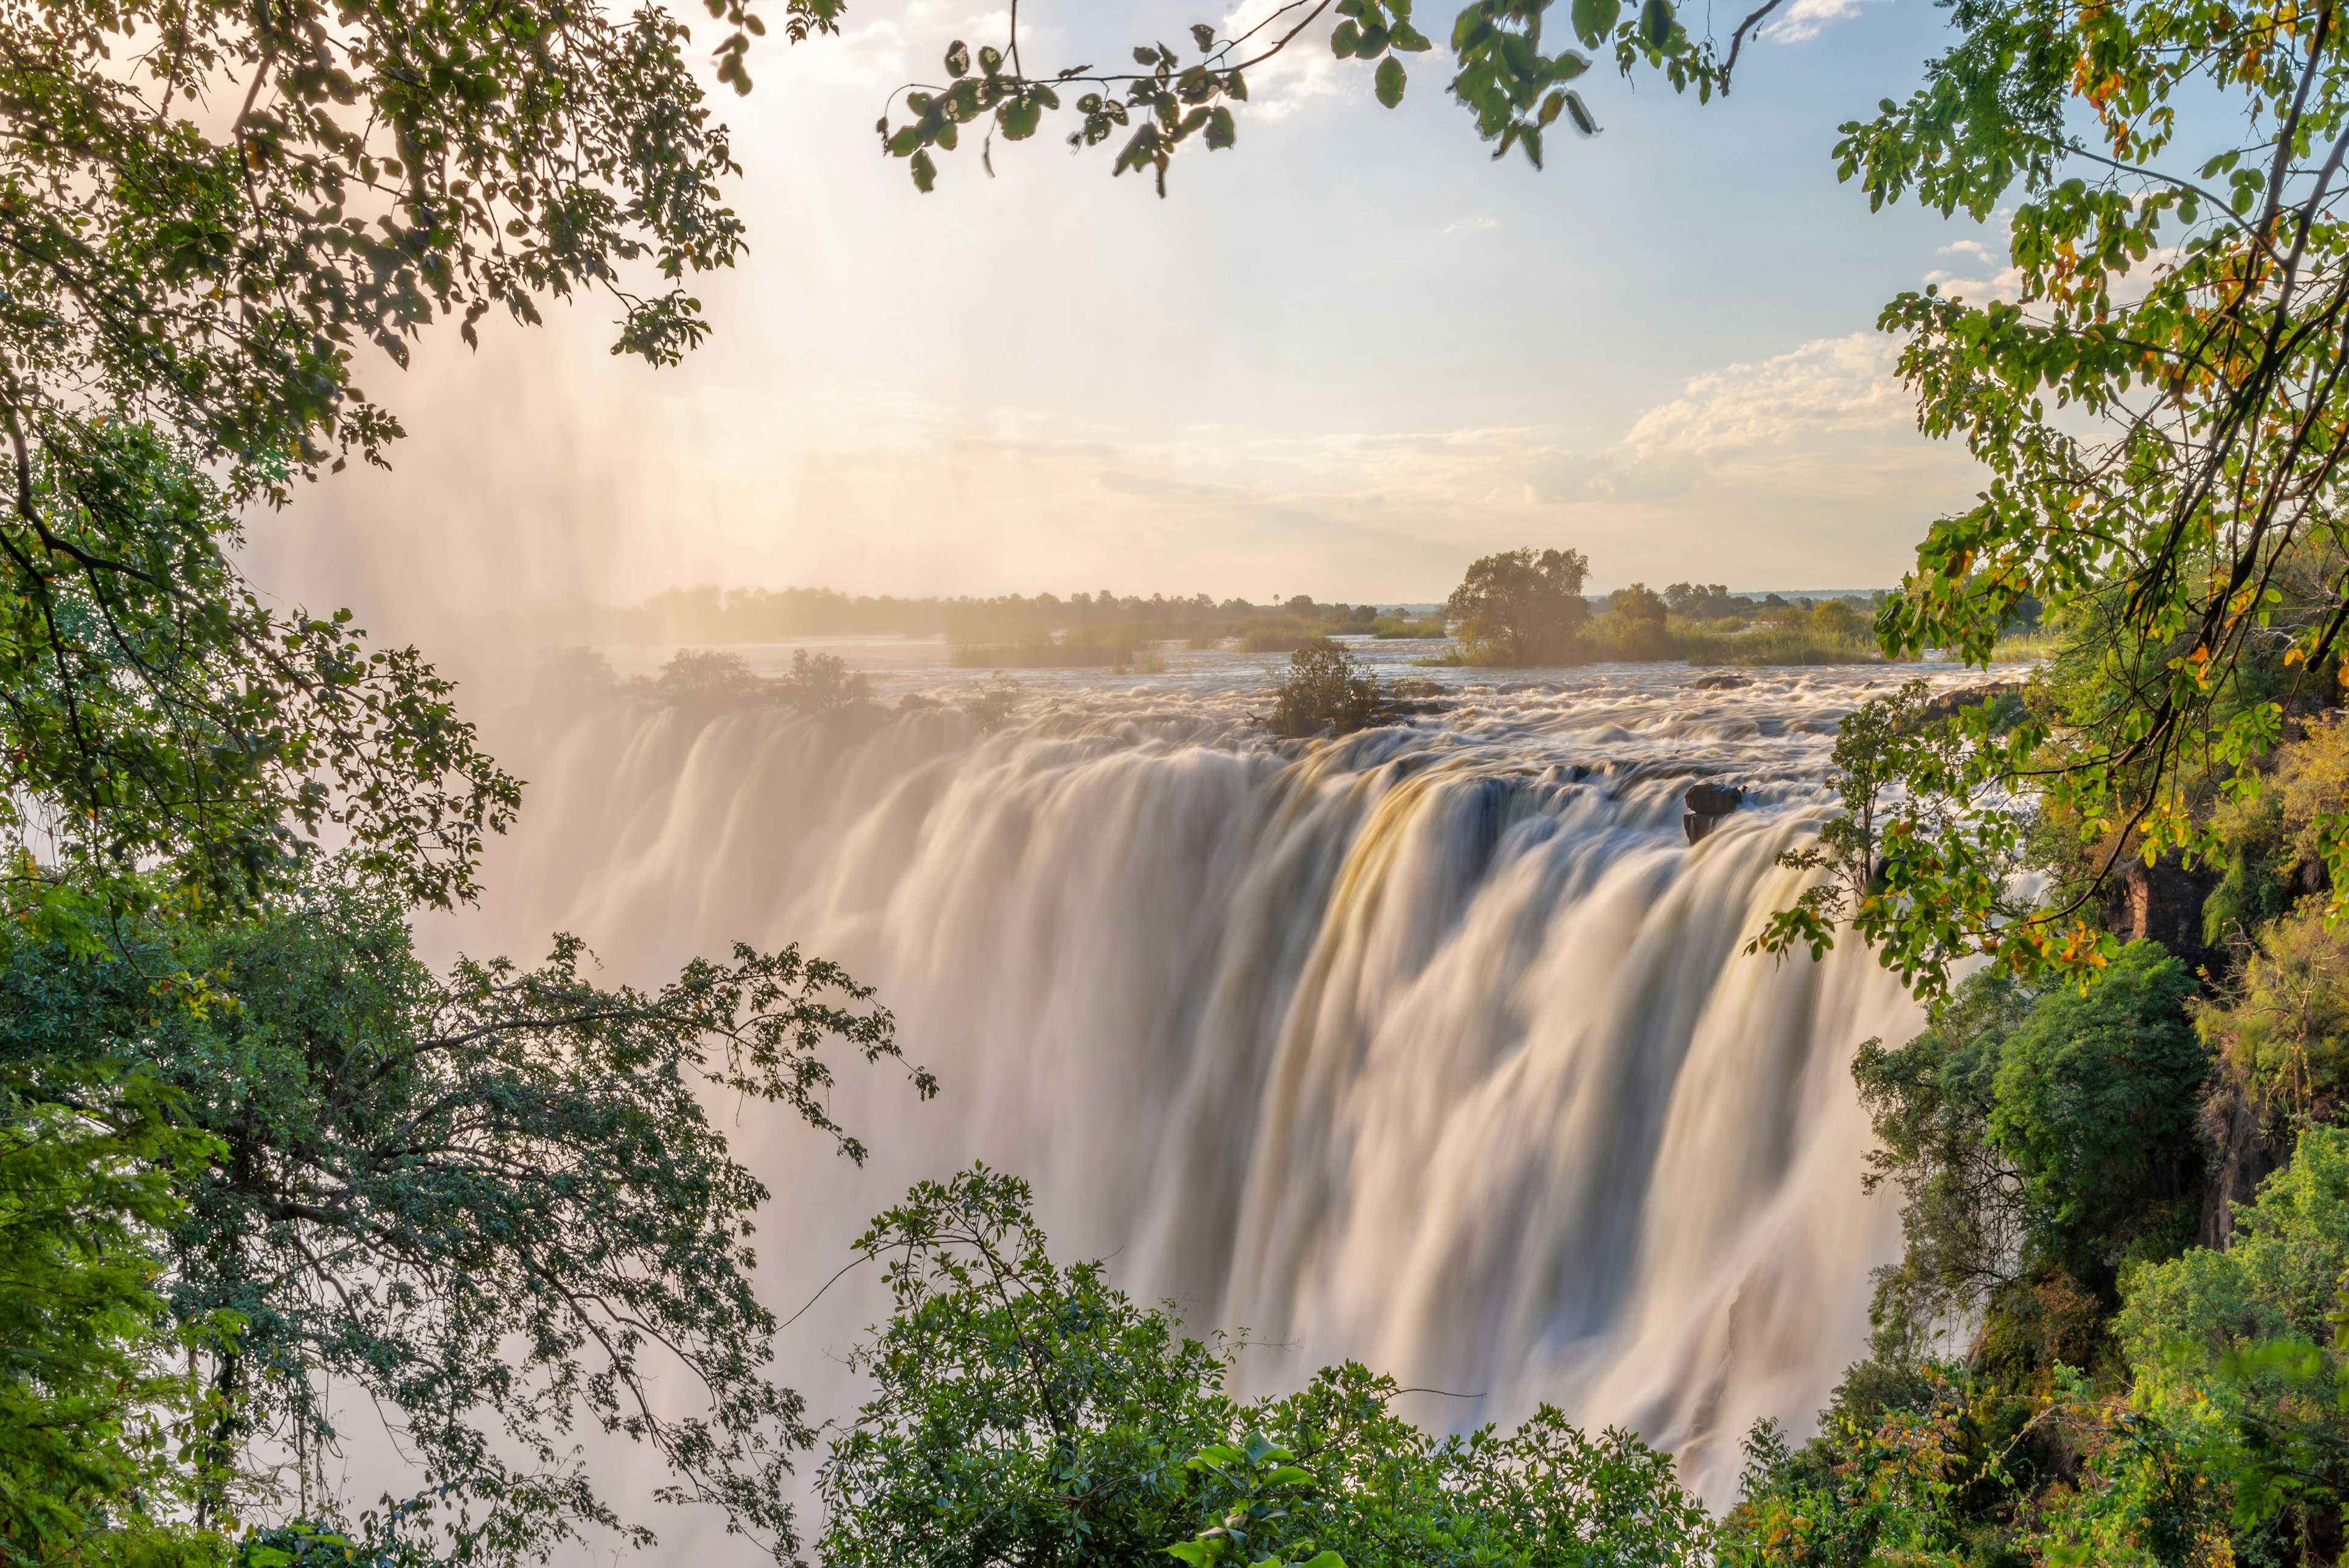 A view through trees to Victoria Falls on the Zambezi River, between Zambia and Zimbabwe, Africa